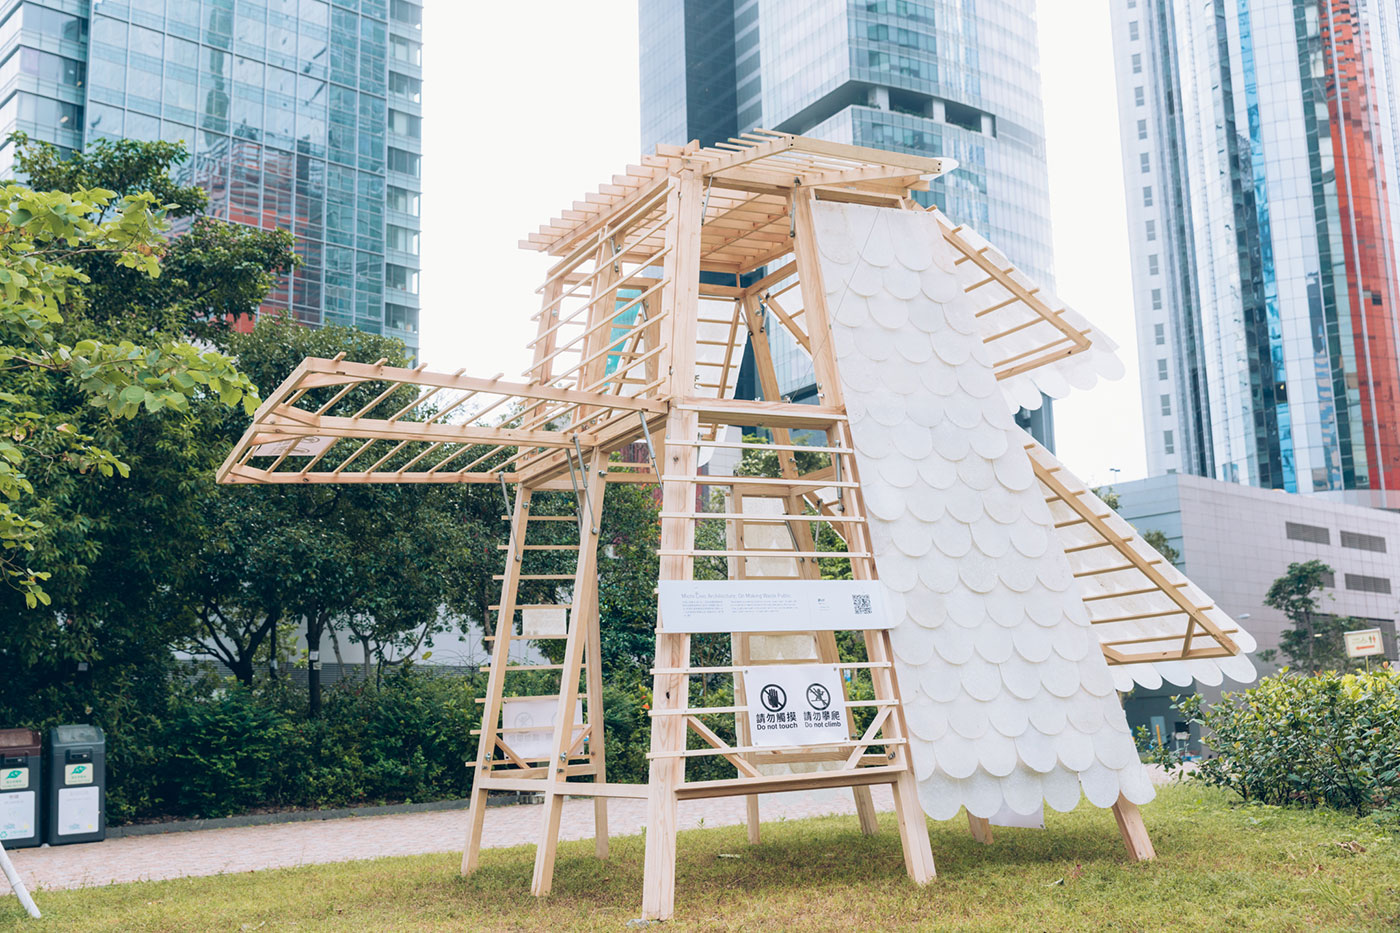 【Micro Civic Architecture: On Making Waste Public】The artwork is a wooden structure, and the “plastic sheet” is made with processed plastic rubbish collected in the city. Each plastic sheet weighs 135g, roughly equivalent to two plastics lunch boxes and two bottles. How many “plastic tower” can you build in your life? by: GAAU1 UP, Upcycling Studio